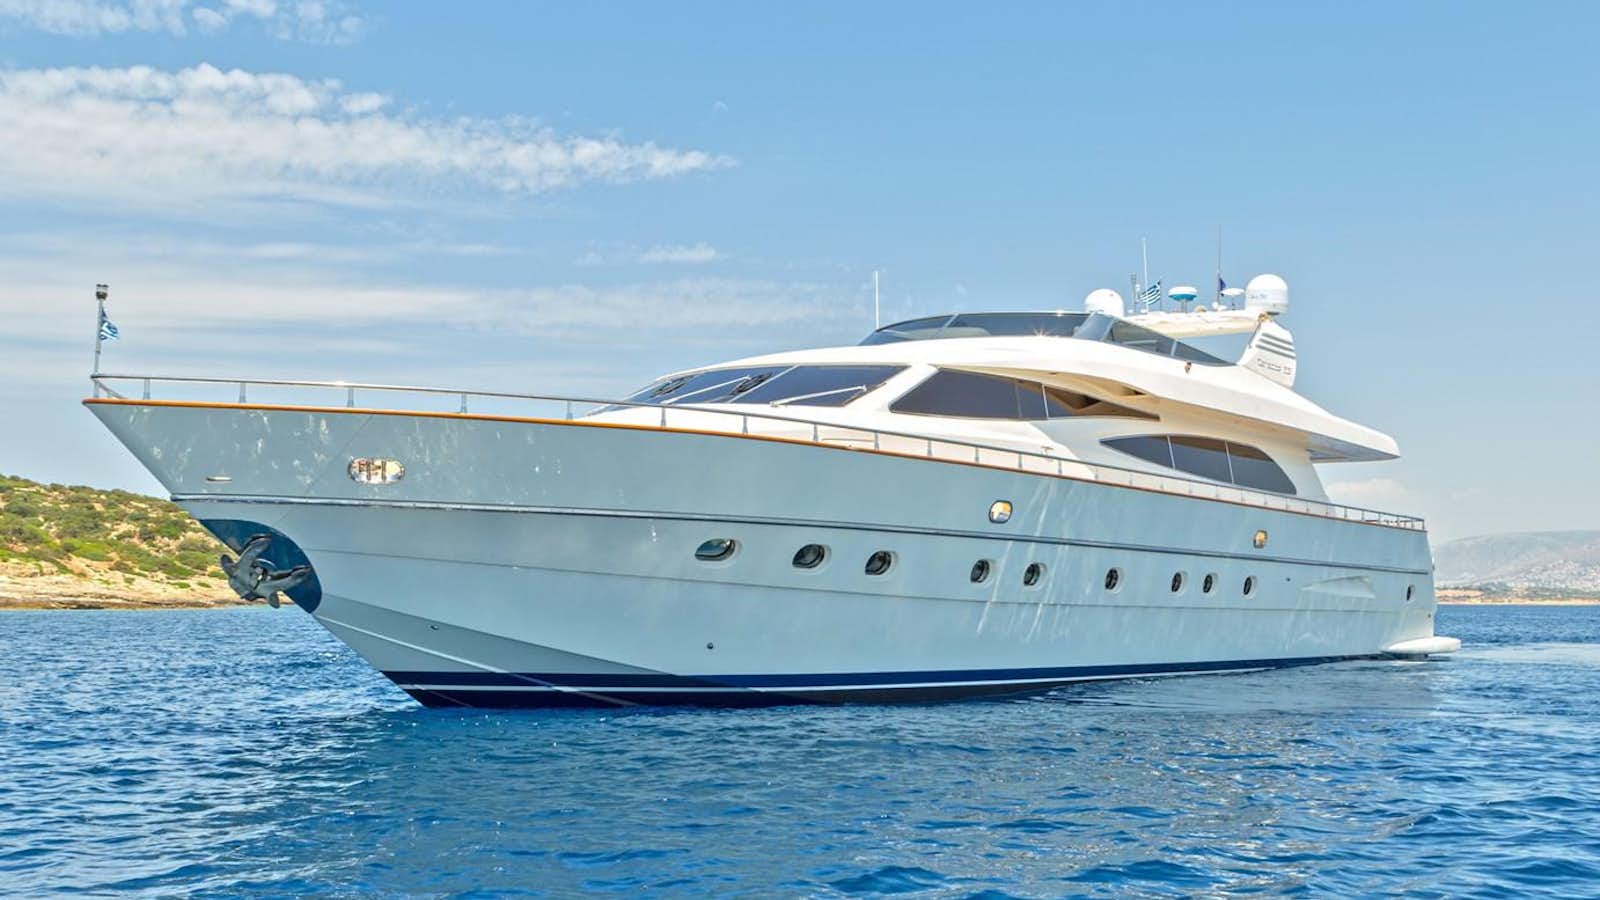 Vyno
Yacht for Sale